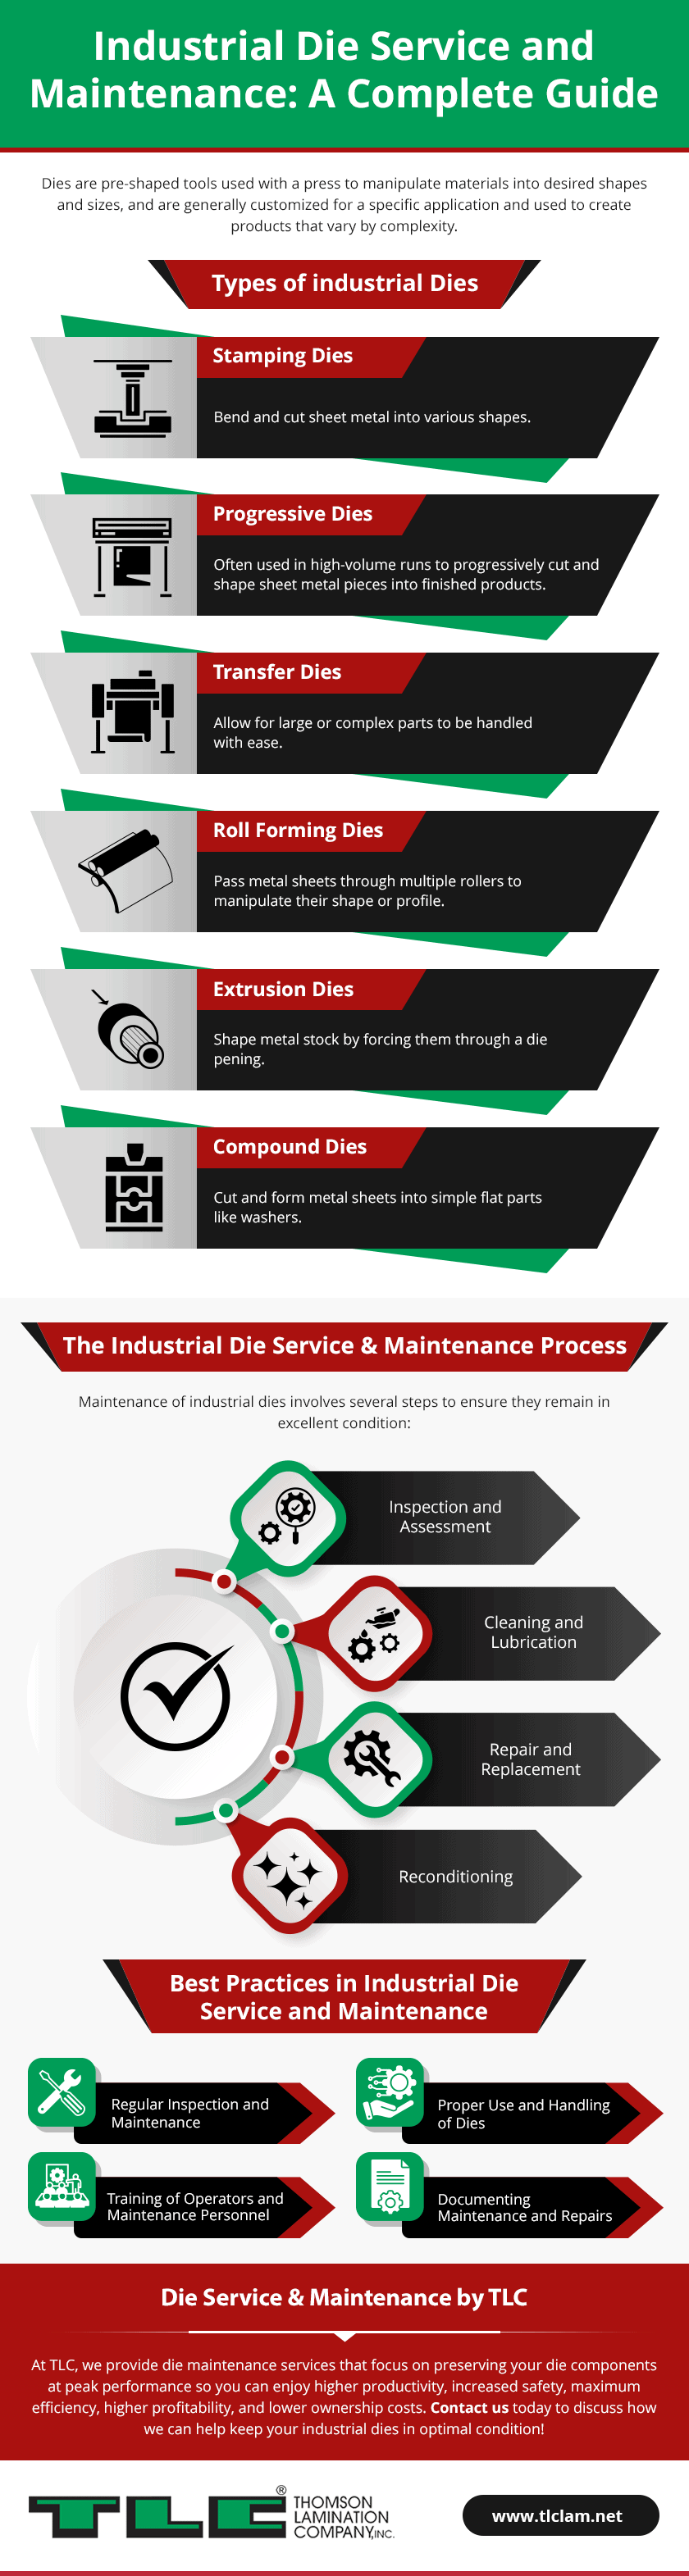 Industrial Die Service and Maintenance: A Complete Guide